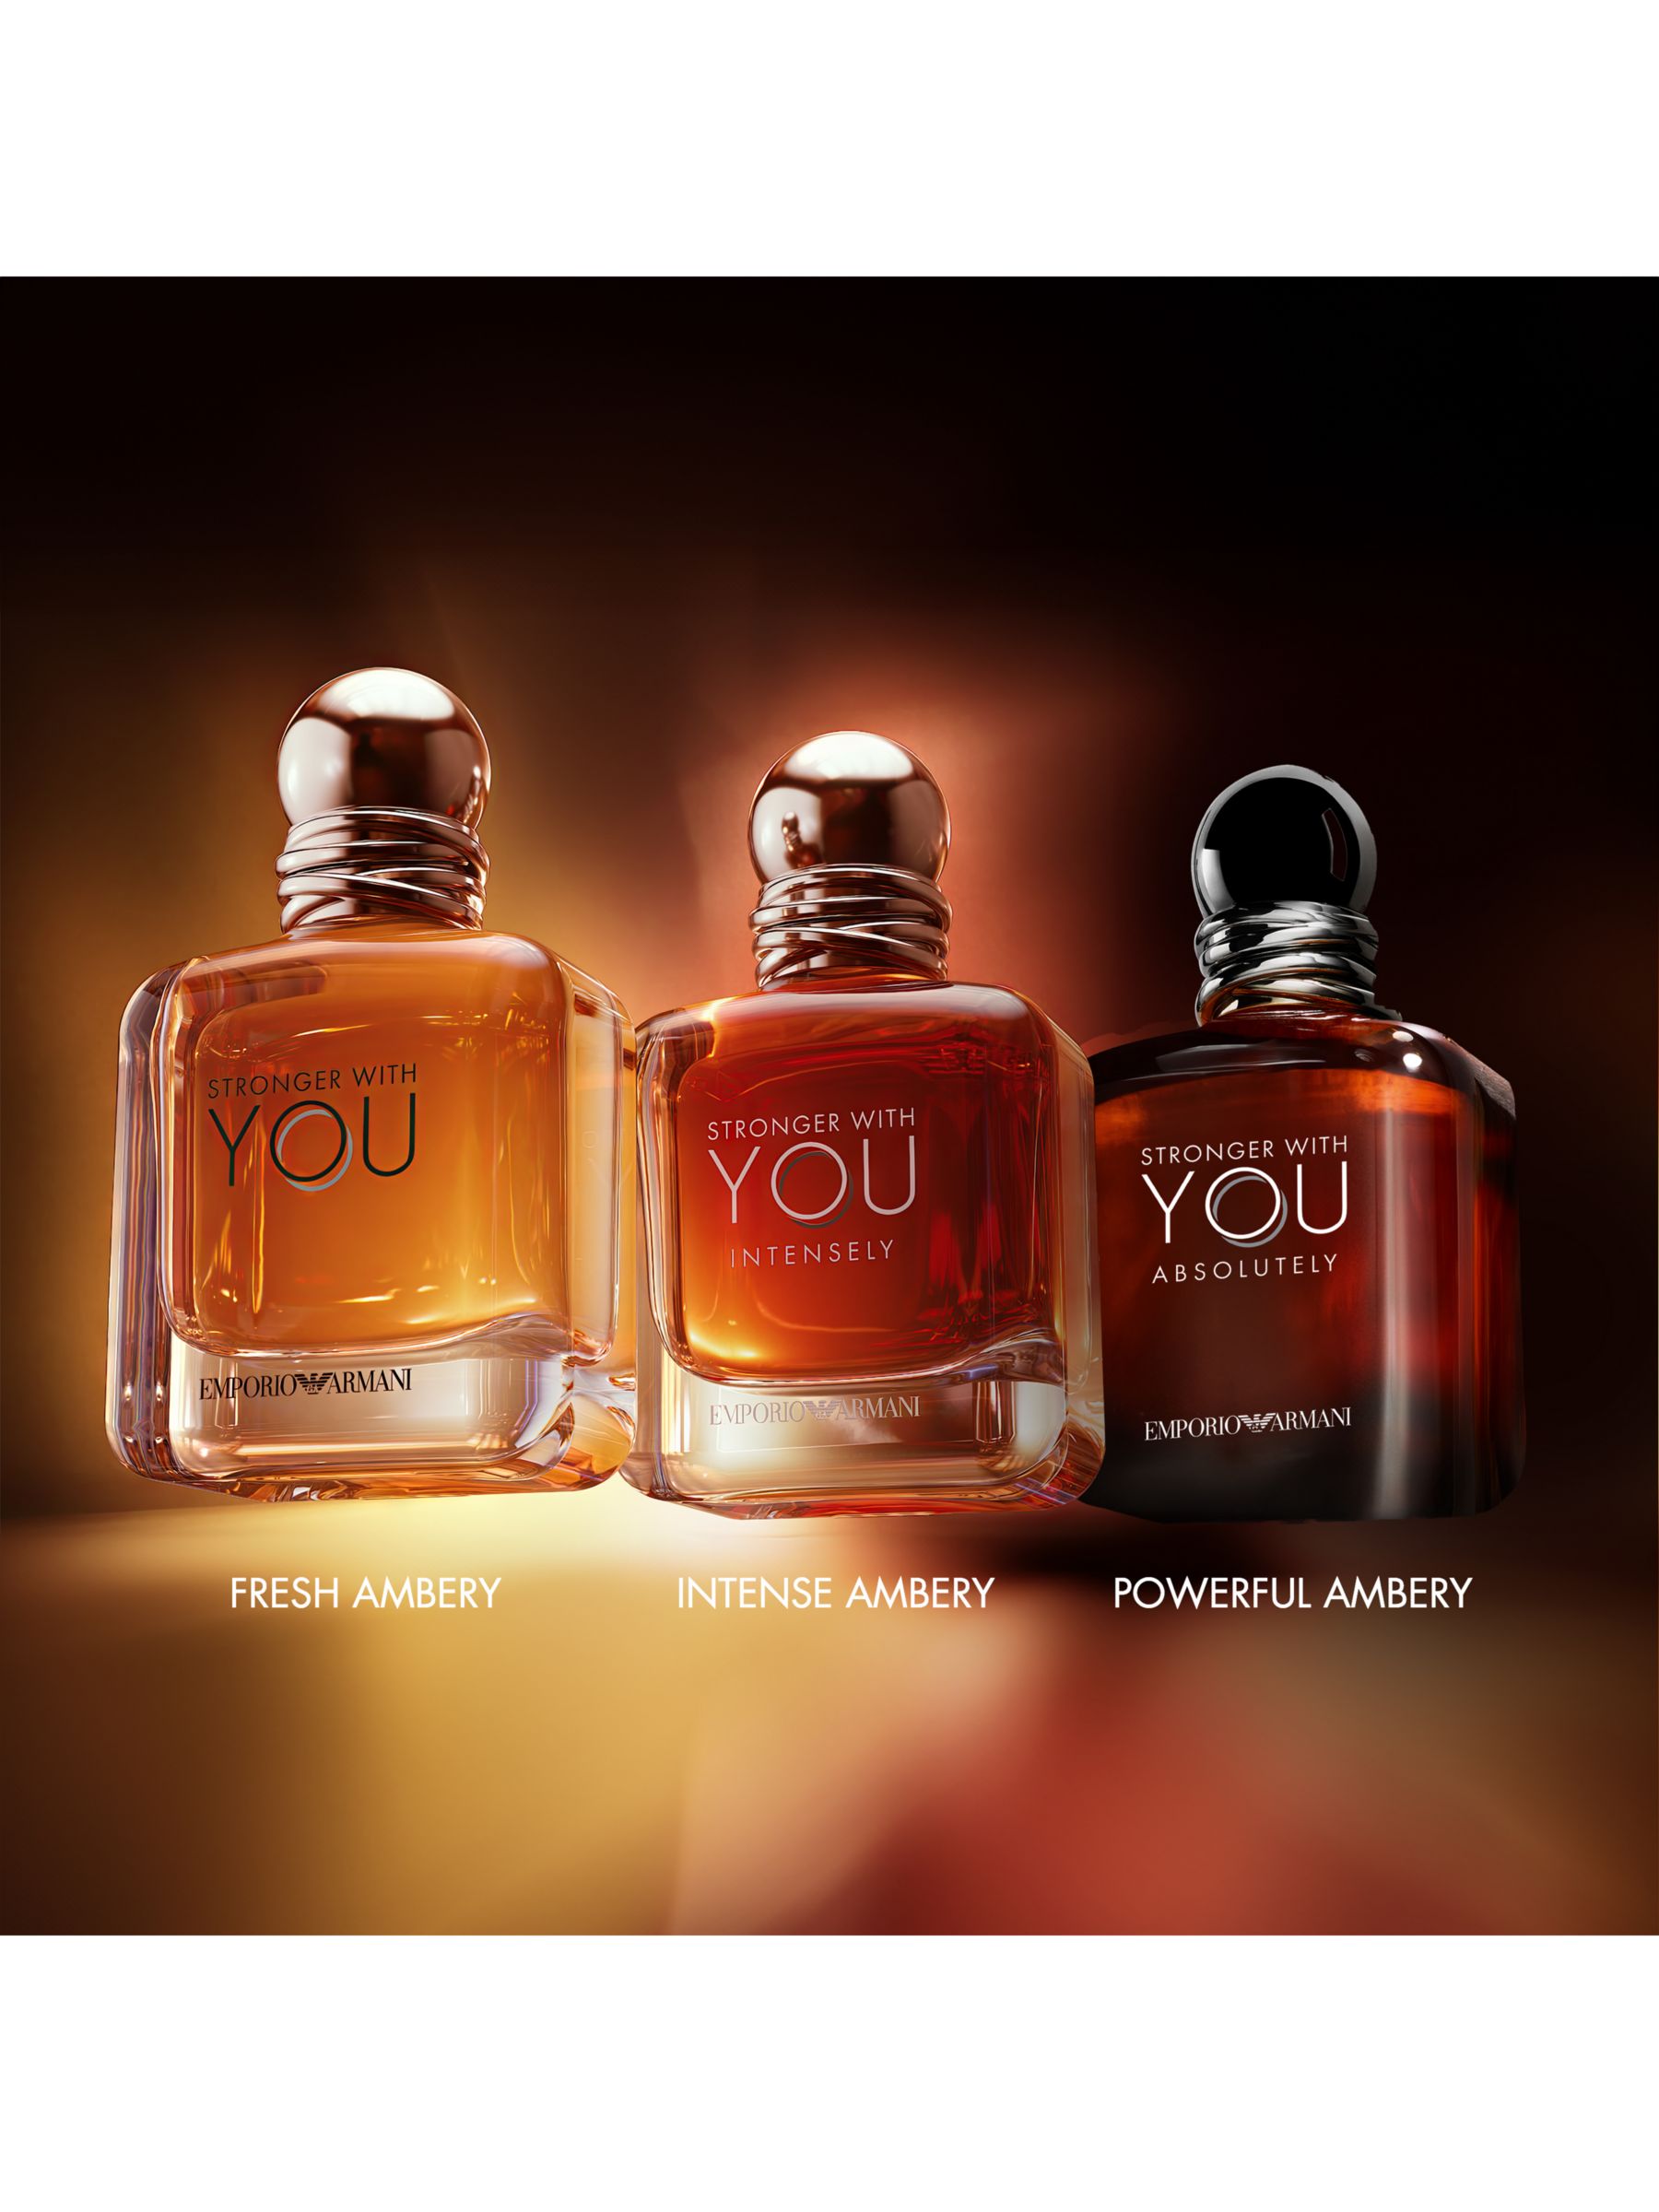 Emporio Armani Stronger With You Absolutely Parfum, 100ml 4